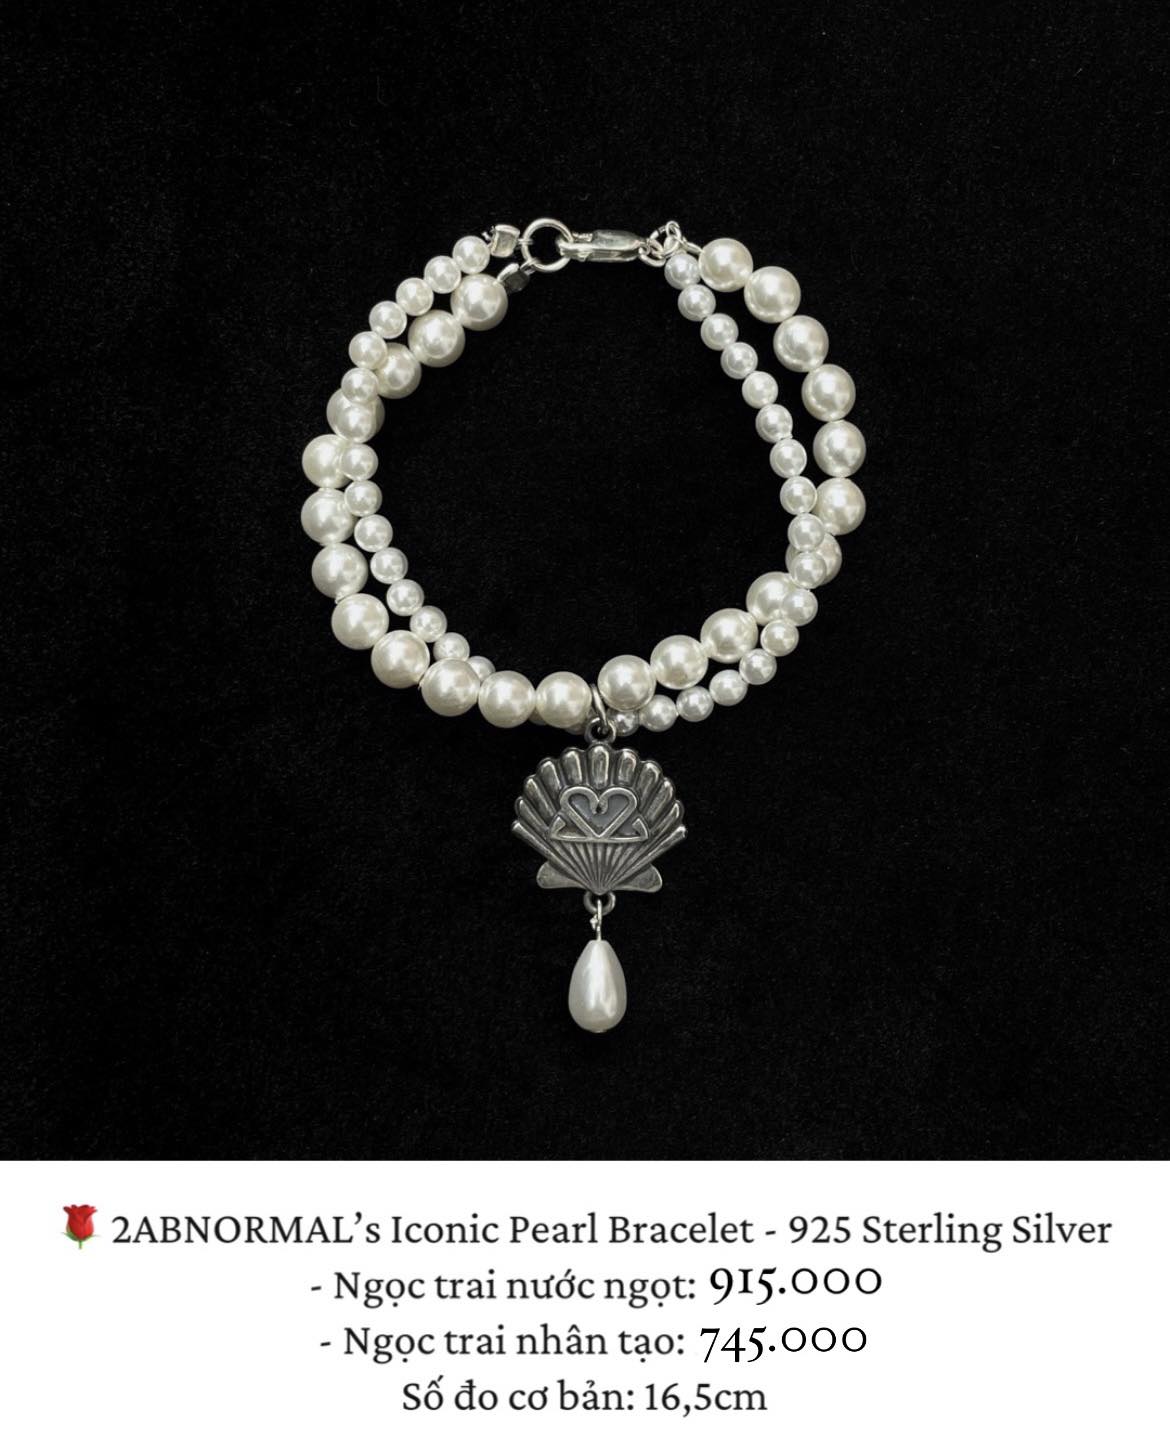 2AB's Iconic Pearl Bracelet - 925 Sterling Silver